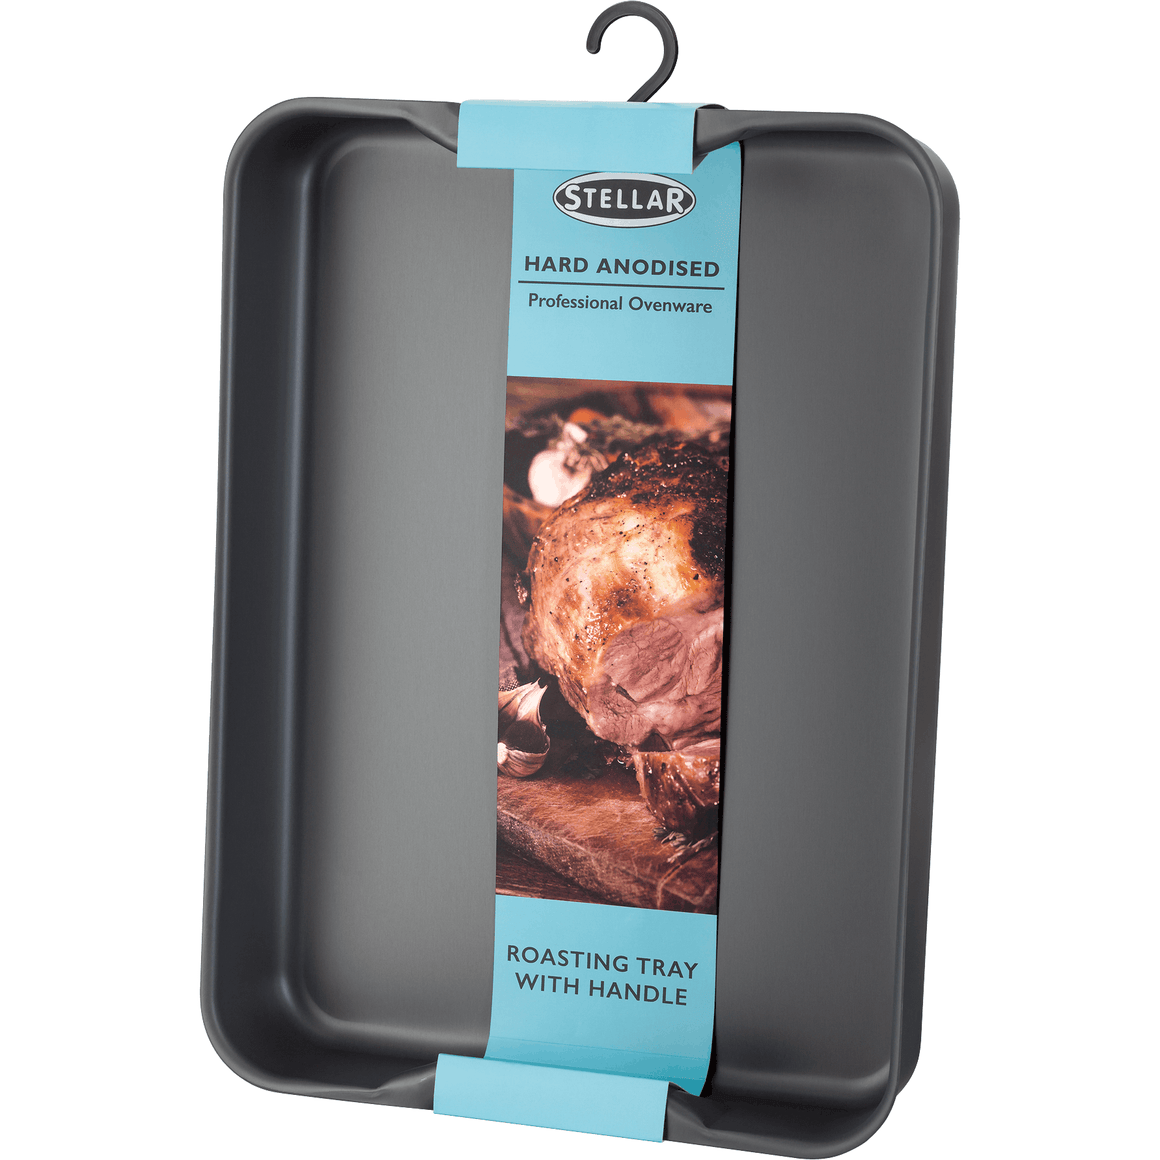 Stellar Hard Anodised Deep Roasting Tray (with Integrated Handle) - All Sizes